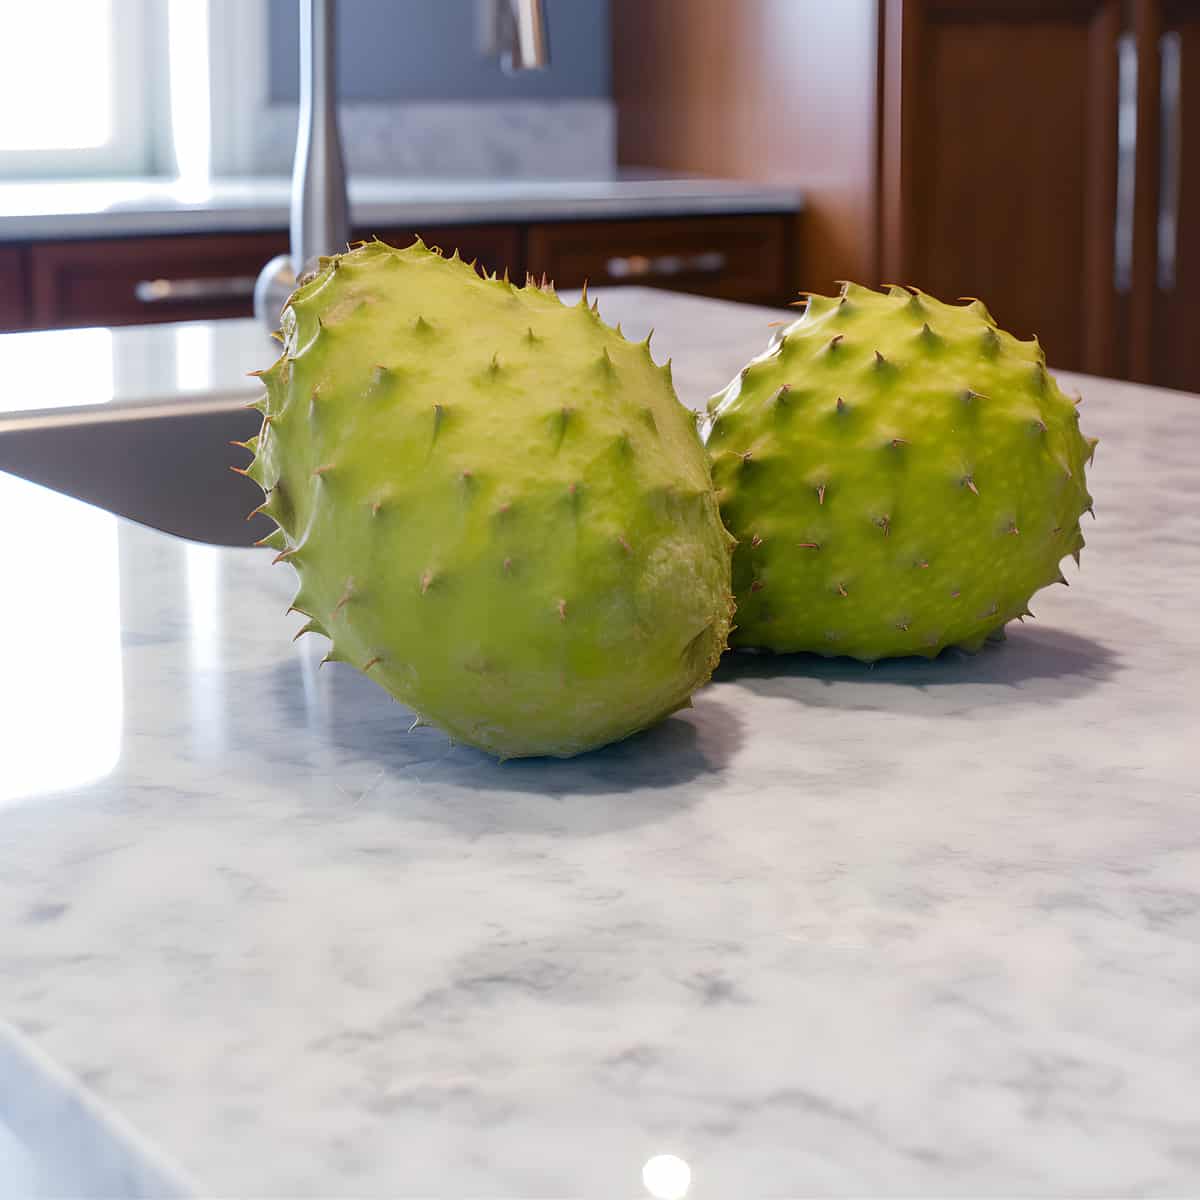 Soursop on a kitchen counter